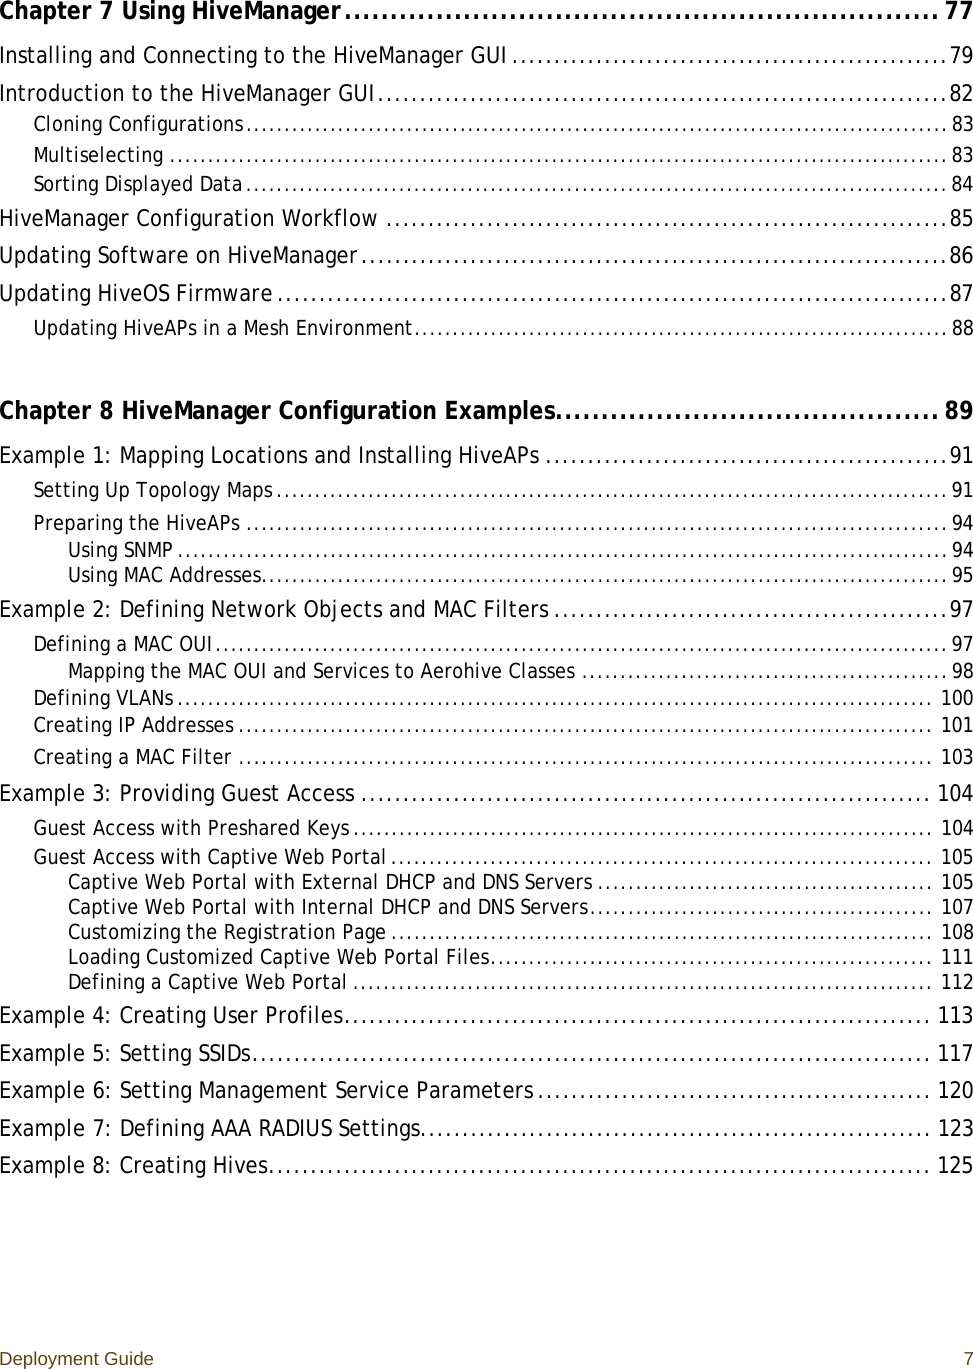 Deployment Guide 7Chapter 7 Using HiveManager.................................................................77Installing and Connecting to the HiveManager GUI ....................................................79Introduction to the HiveManager GUI....................................................................82Cloning Configurations............................................................................................83Multiselecting ......................................................................................................83Sorting Displayed Data............................................................................................84HiveManager Configuration Workflow ...................................................................85Updating Software on HiveManager......................................................................86Updating HiveOS Firmware ................................................................................87Updating HiveAPs in a Mesh Environment......................................................................88Chapter 8 HiveManager Configuration Examples..........................................89Example 1: Mapping Locations and Installing HiveAPs ................................................91Setting Up Topology Maps ........................................................................................91Preparing the HiveAPs ............................................................................................94Using SNMP .....................................................................................................94Using MAC Addresses..........................................................................................95Example 2: Defining Network Objects and MAC Filters ...............................................97Defining a MAC OUI................................................................................................97Mapping the MAC OUI and Services to Aerohive Classes ................................................98Defining VLANs ................................................................................................... 100Creating IP Addresses ........................................................................................... 101Creating a MAC Filter ........................................................................................... 103Example 3: Providing Guest Access .................................................................... 104Guest Access with Preshared Keys ............................................................................ 104Guest Access with Captive Web Portal....................................................................... 105Captive Web Portal with External DHCP and DNS Servers ............................................ 105Captive Web Portal with Internal DHCP and DNS Servers............................................. 107Customizing the Registration Page ....................................................................... 108Loading Customized Captive Web Portal Files.......................................................... 111Defining a Captive Web Portal ............................................................................ 112Example 4: Creating User Profiles...................................................................... 113Example 5: Setting SSIDs................................................................................. 117Example 6: Setting Management Service Parameters ............................................... 120Example 7: Defining AAA RADIUS Settings............................................................. 123Example 8: Creating Hives............................................................................... 125